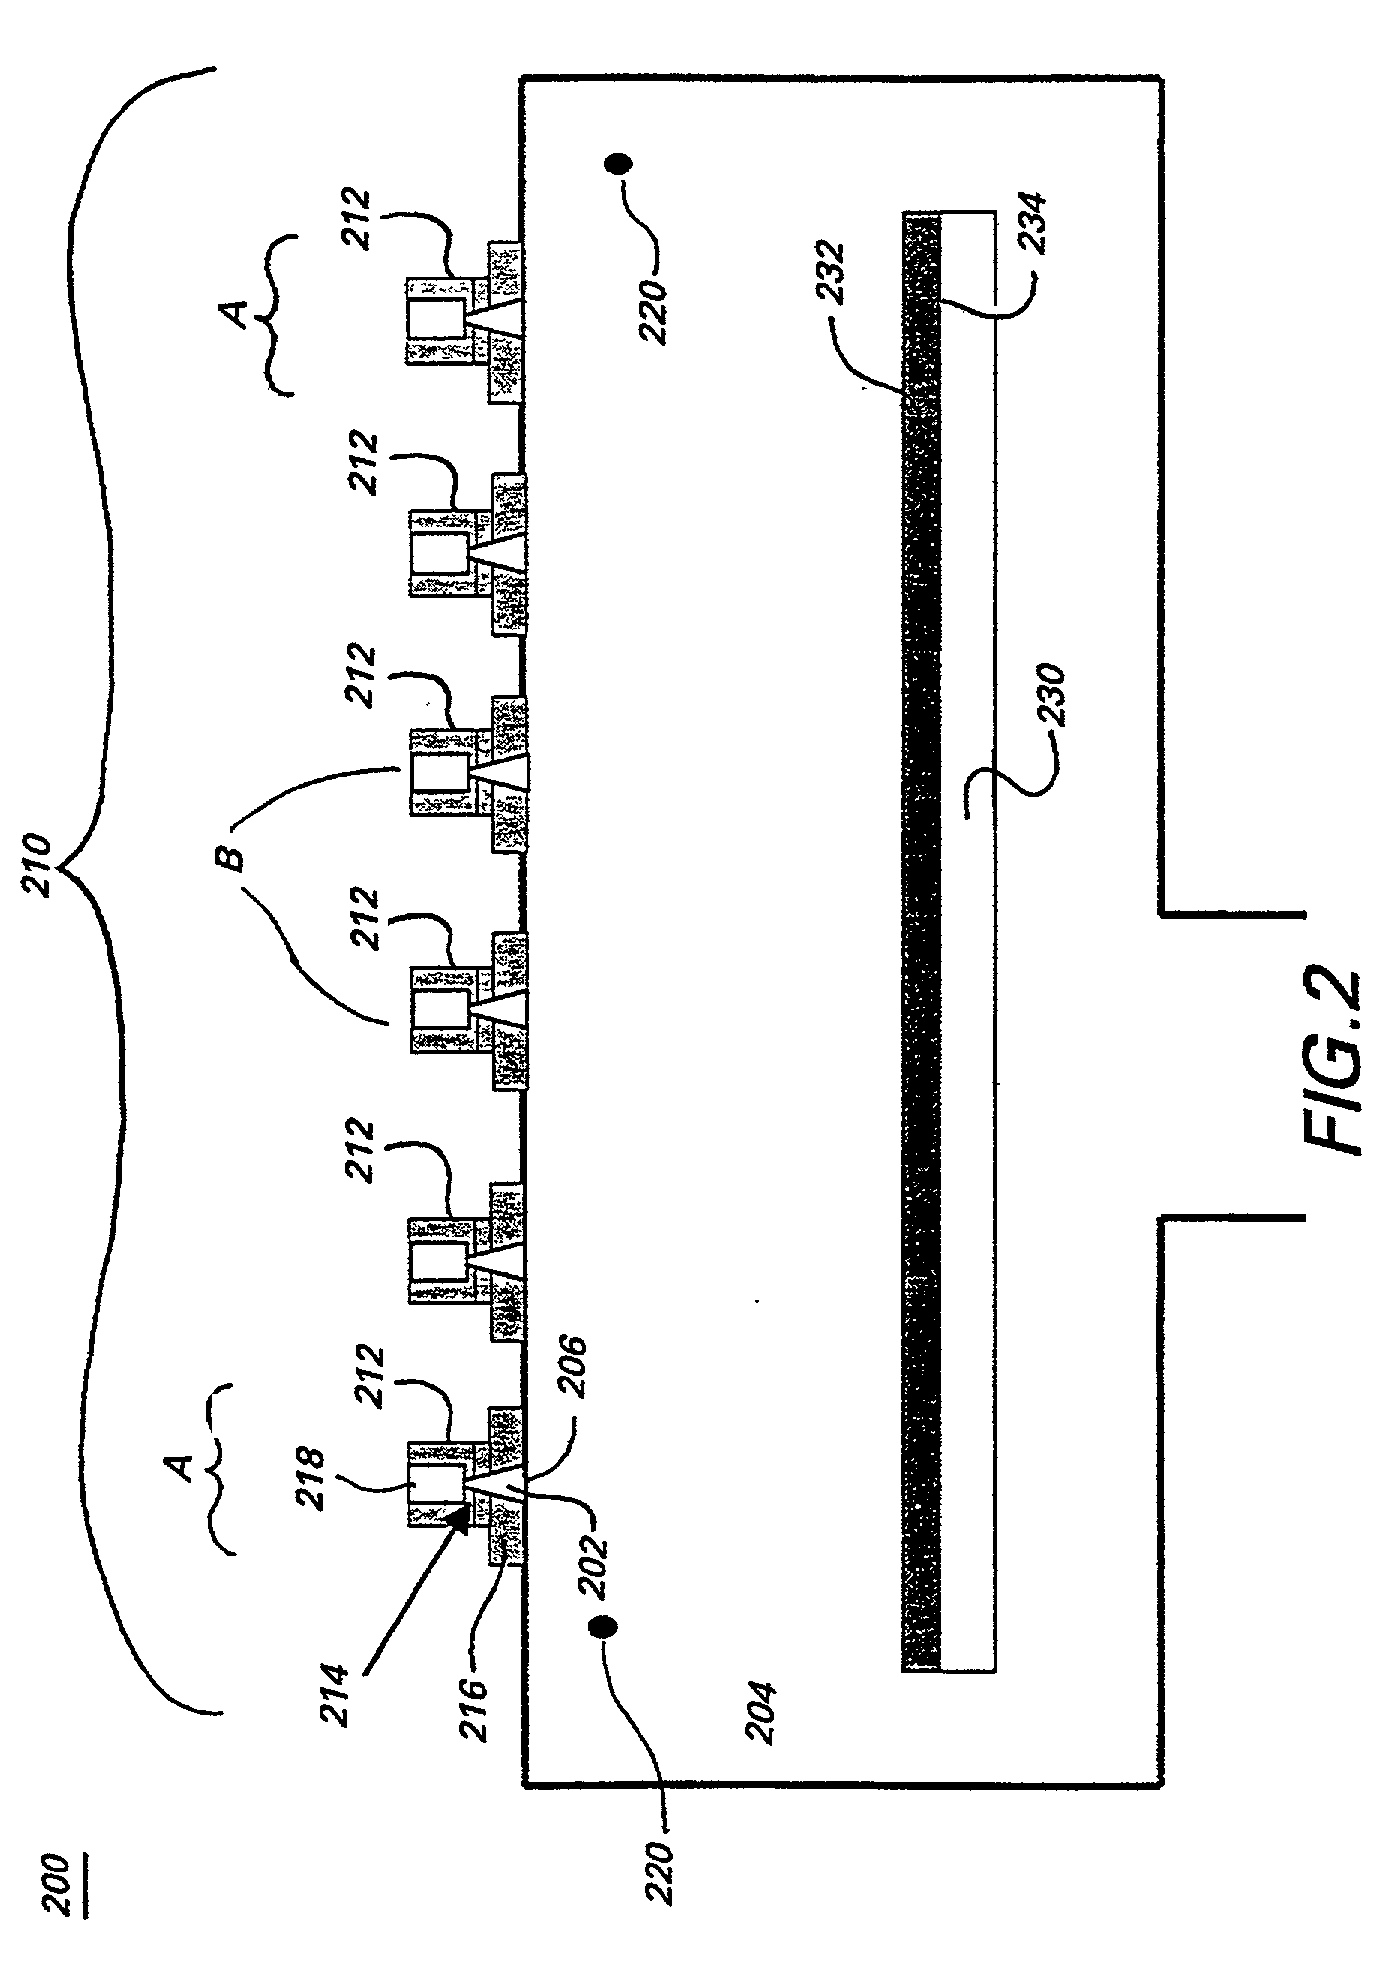 Processes and systems for determining the identity of metal alloys